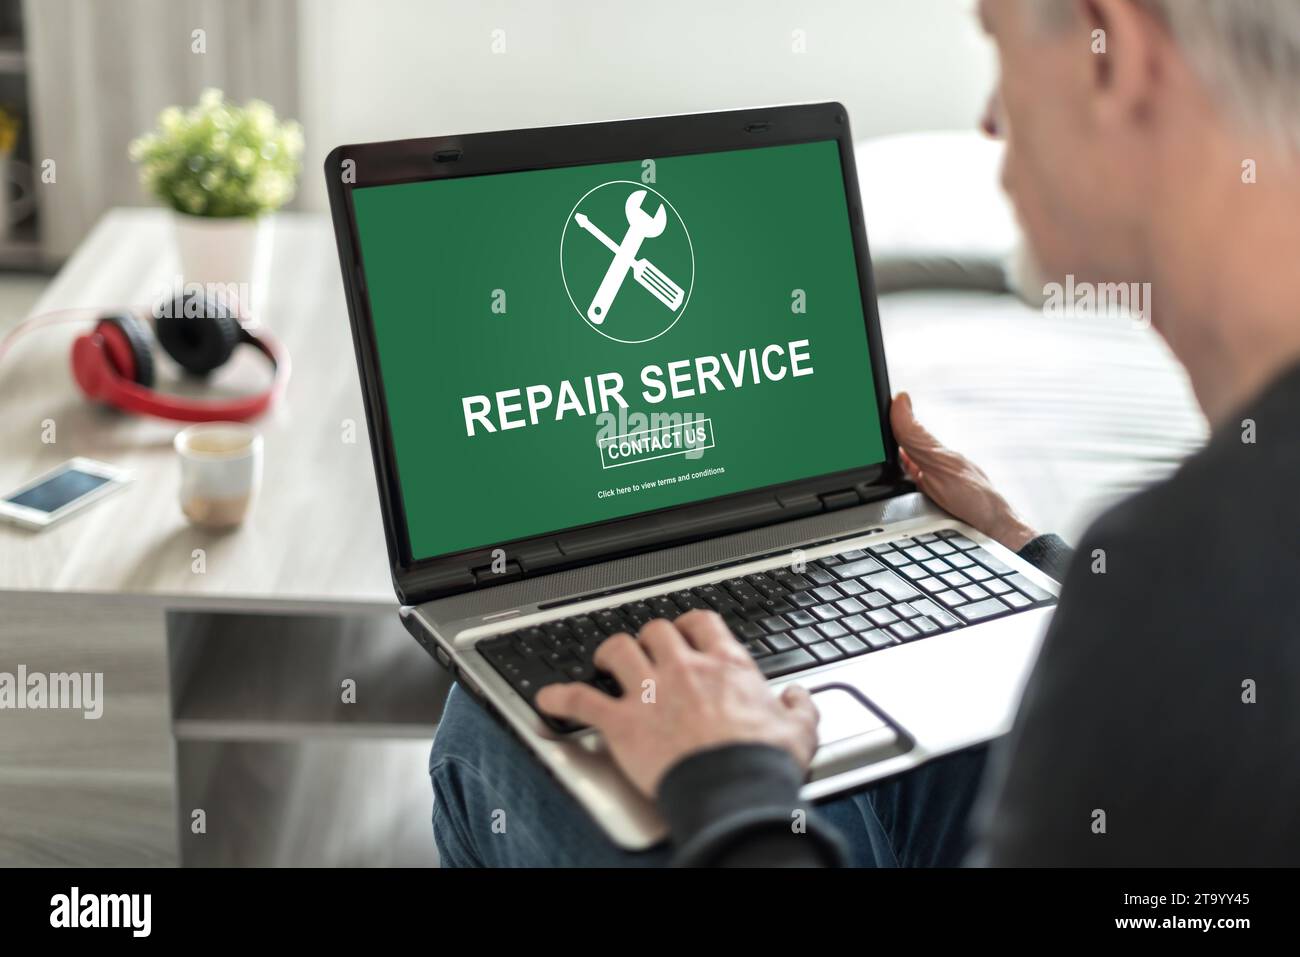 Laptop screen displaying a repair service concept Stock Photo